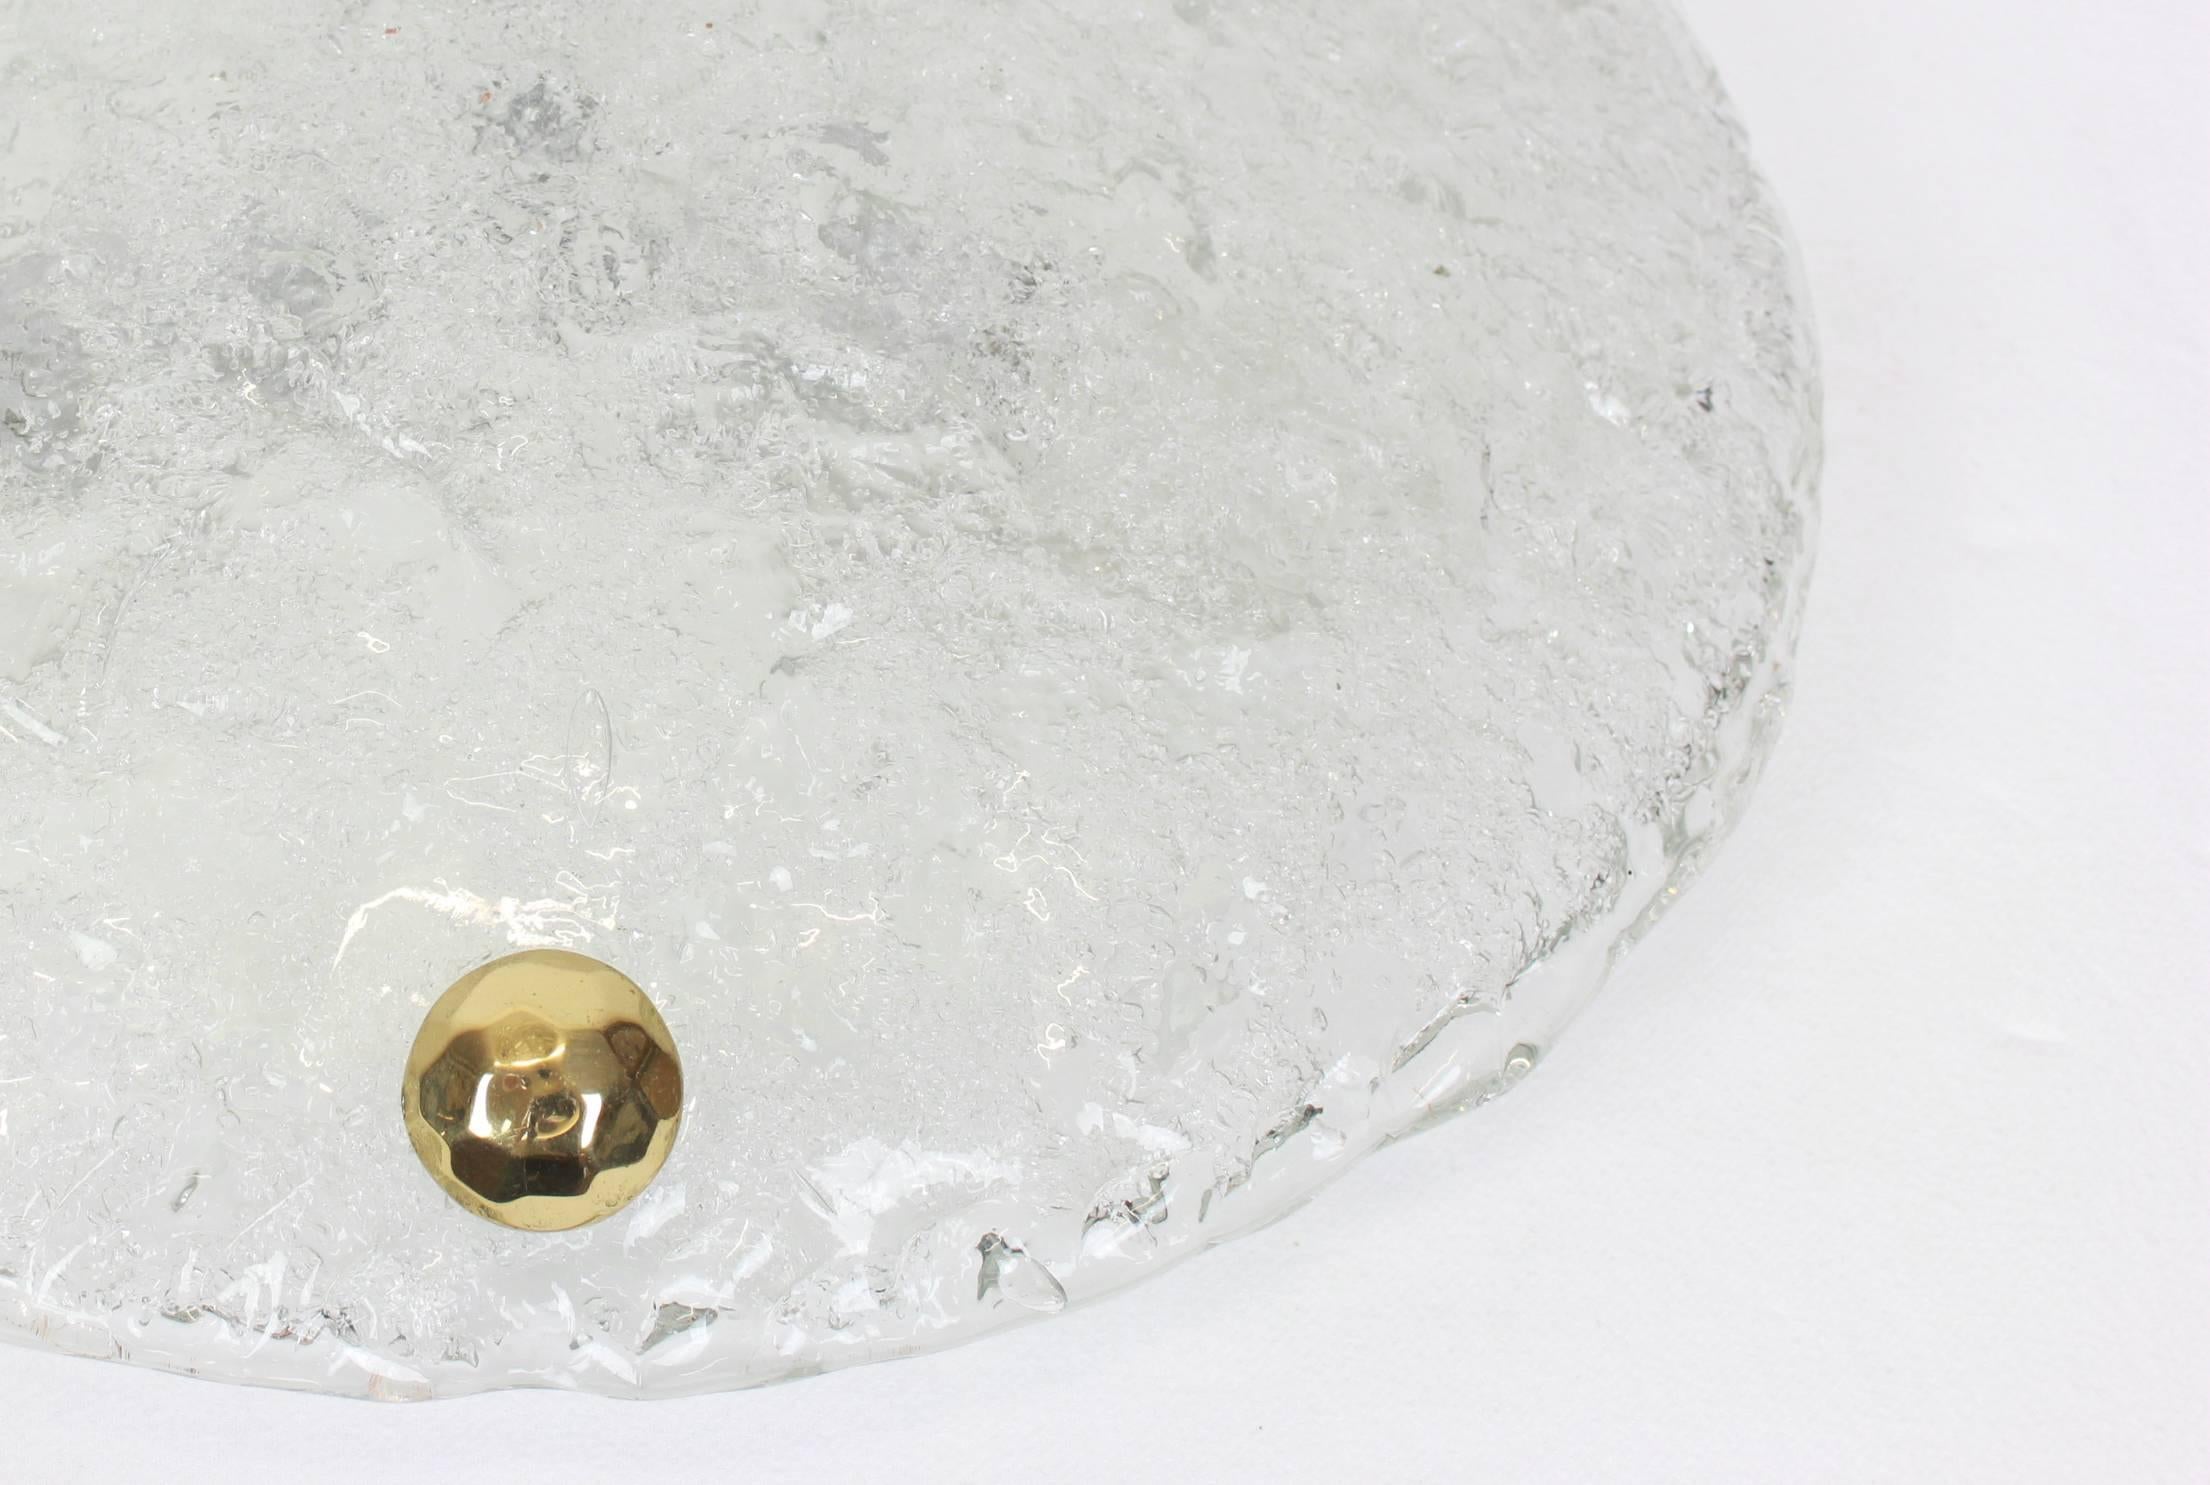 A wonderful round ice glass flush mount by Hillebrand Leuchten, Germany, 1970s.
 Thick textured ice glass fixtured on a white metal base with three brass screws.

High quality and in perfect condition. Cleaned, well-wired and ready to use. 

The